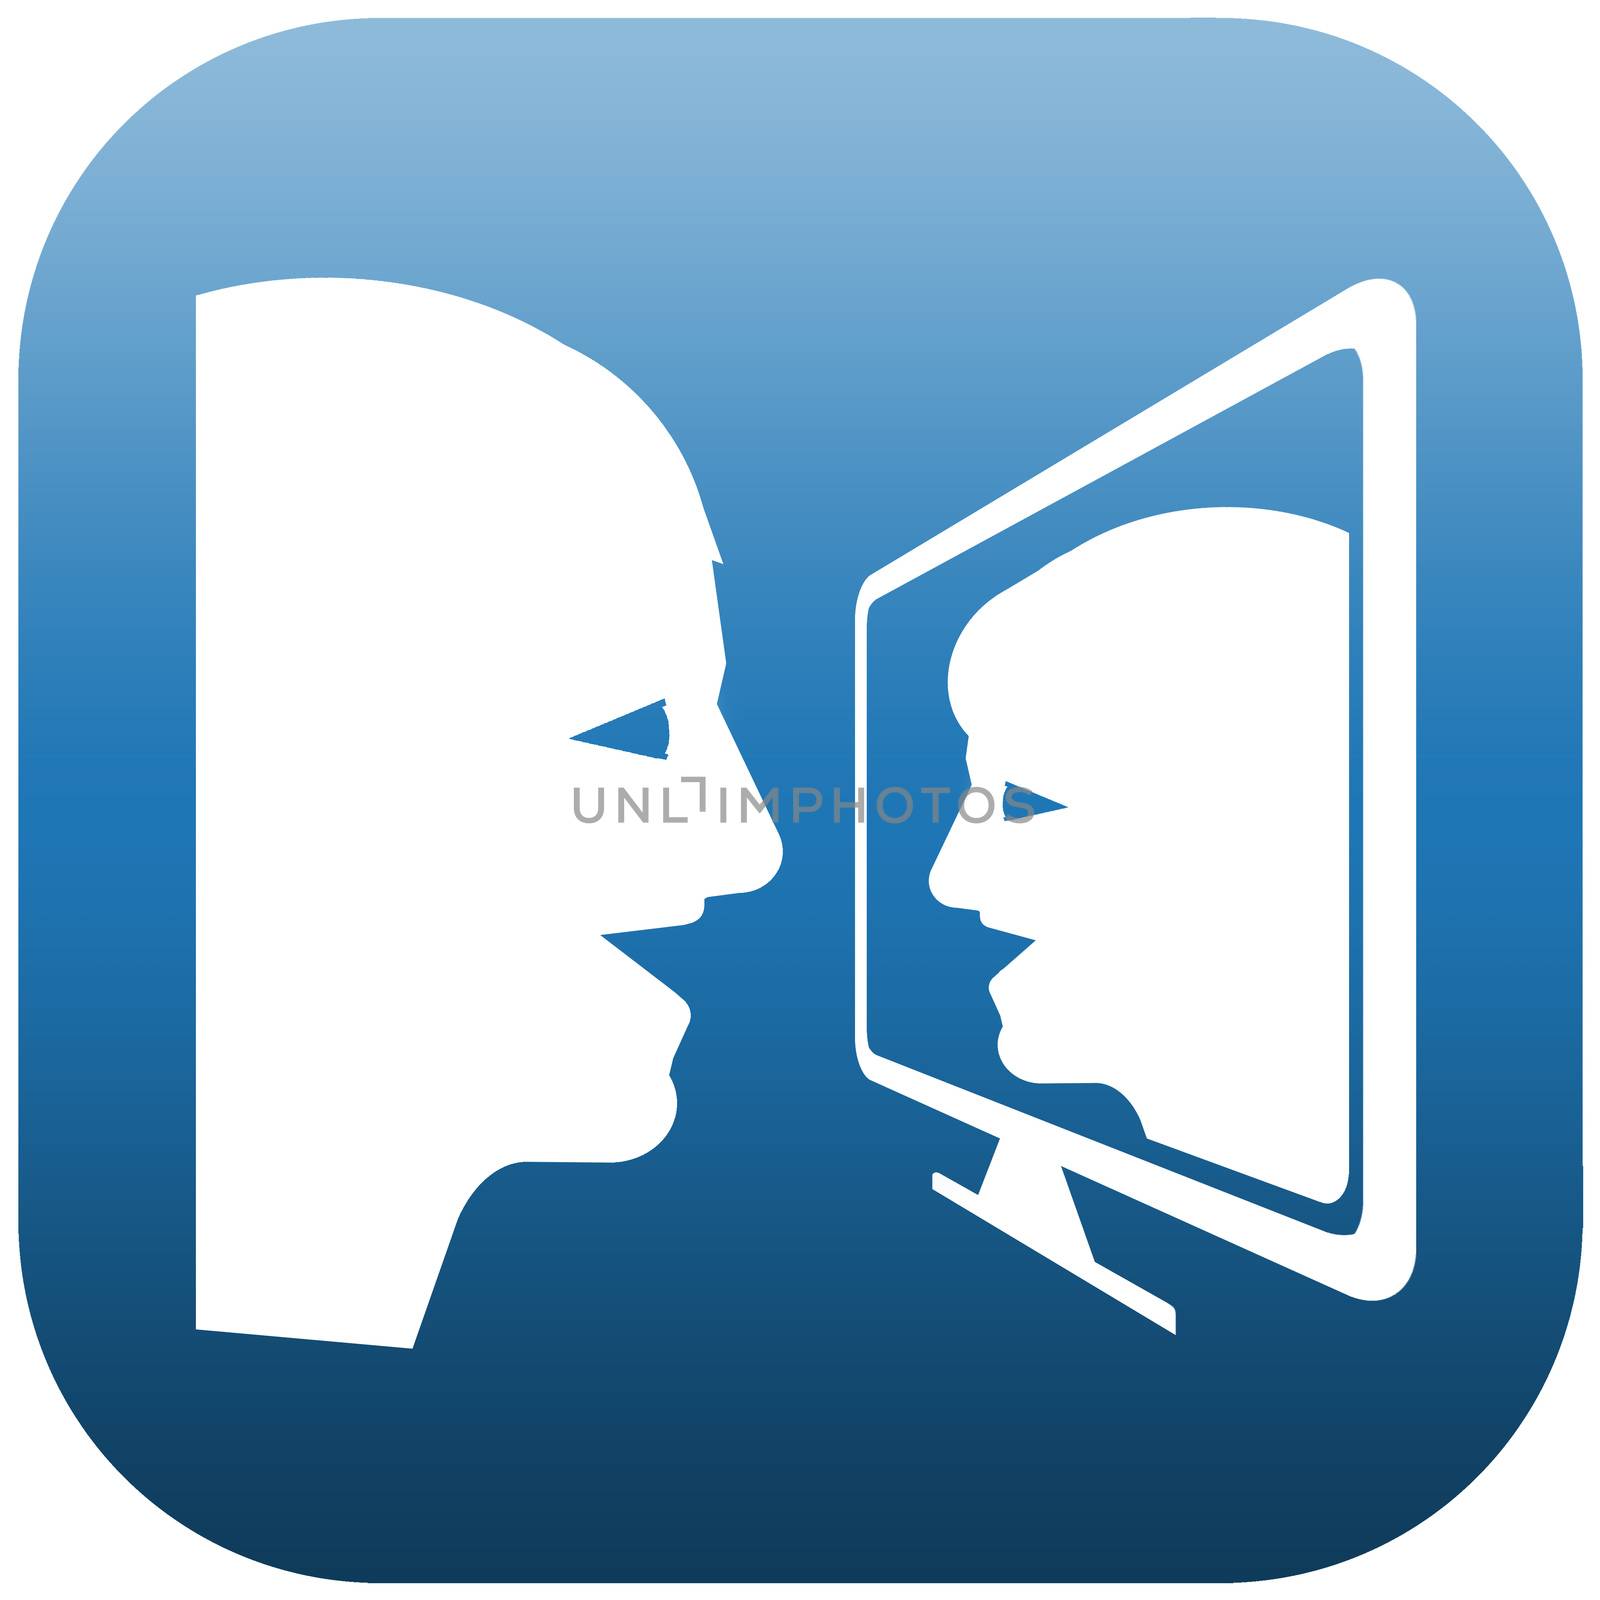 Blue and white icon illustration of two people doing chat on a screen